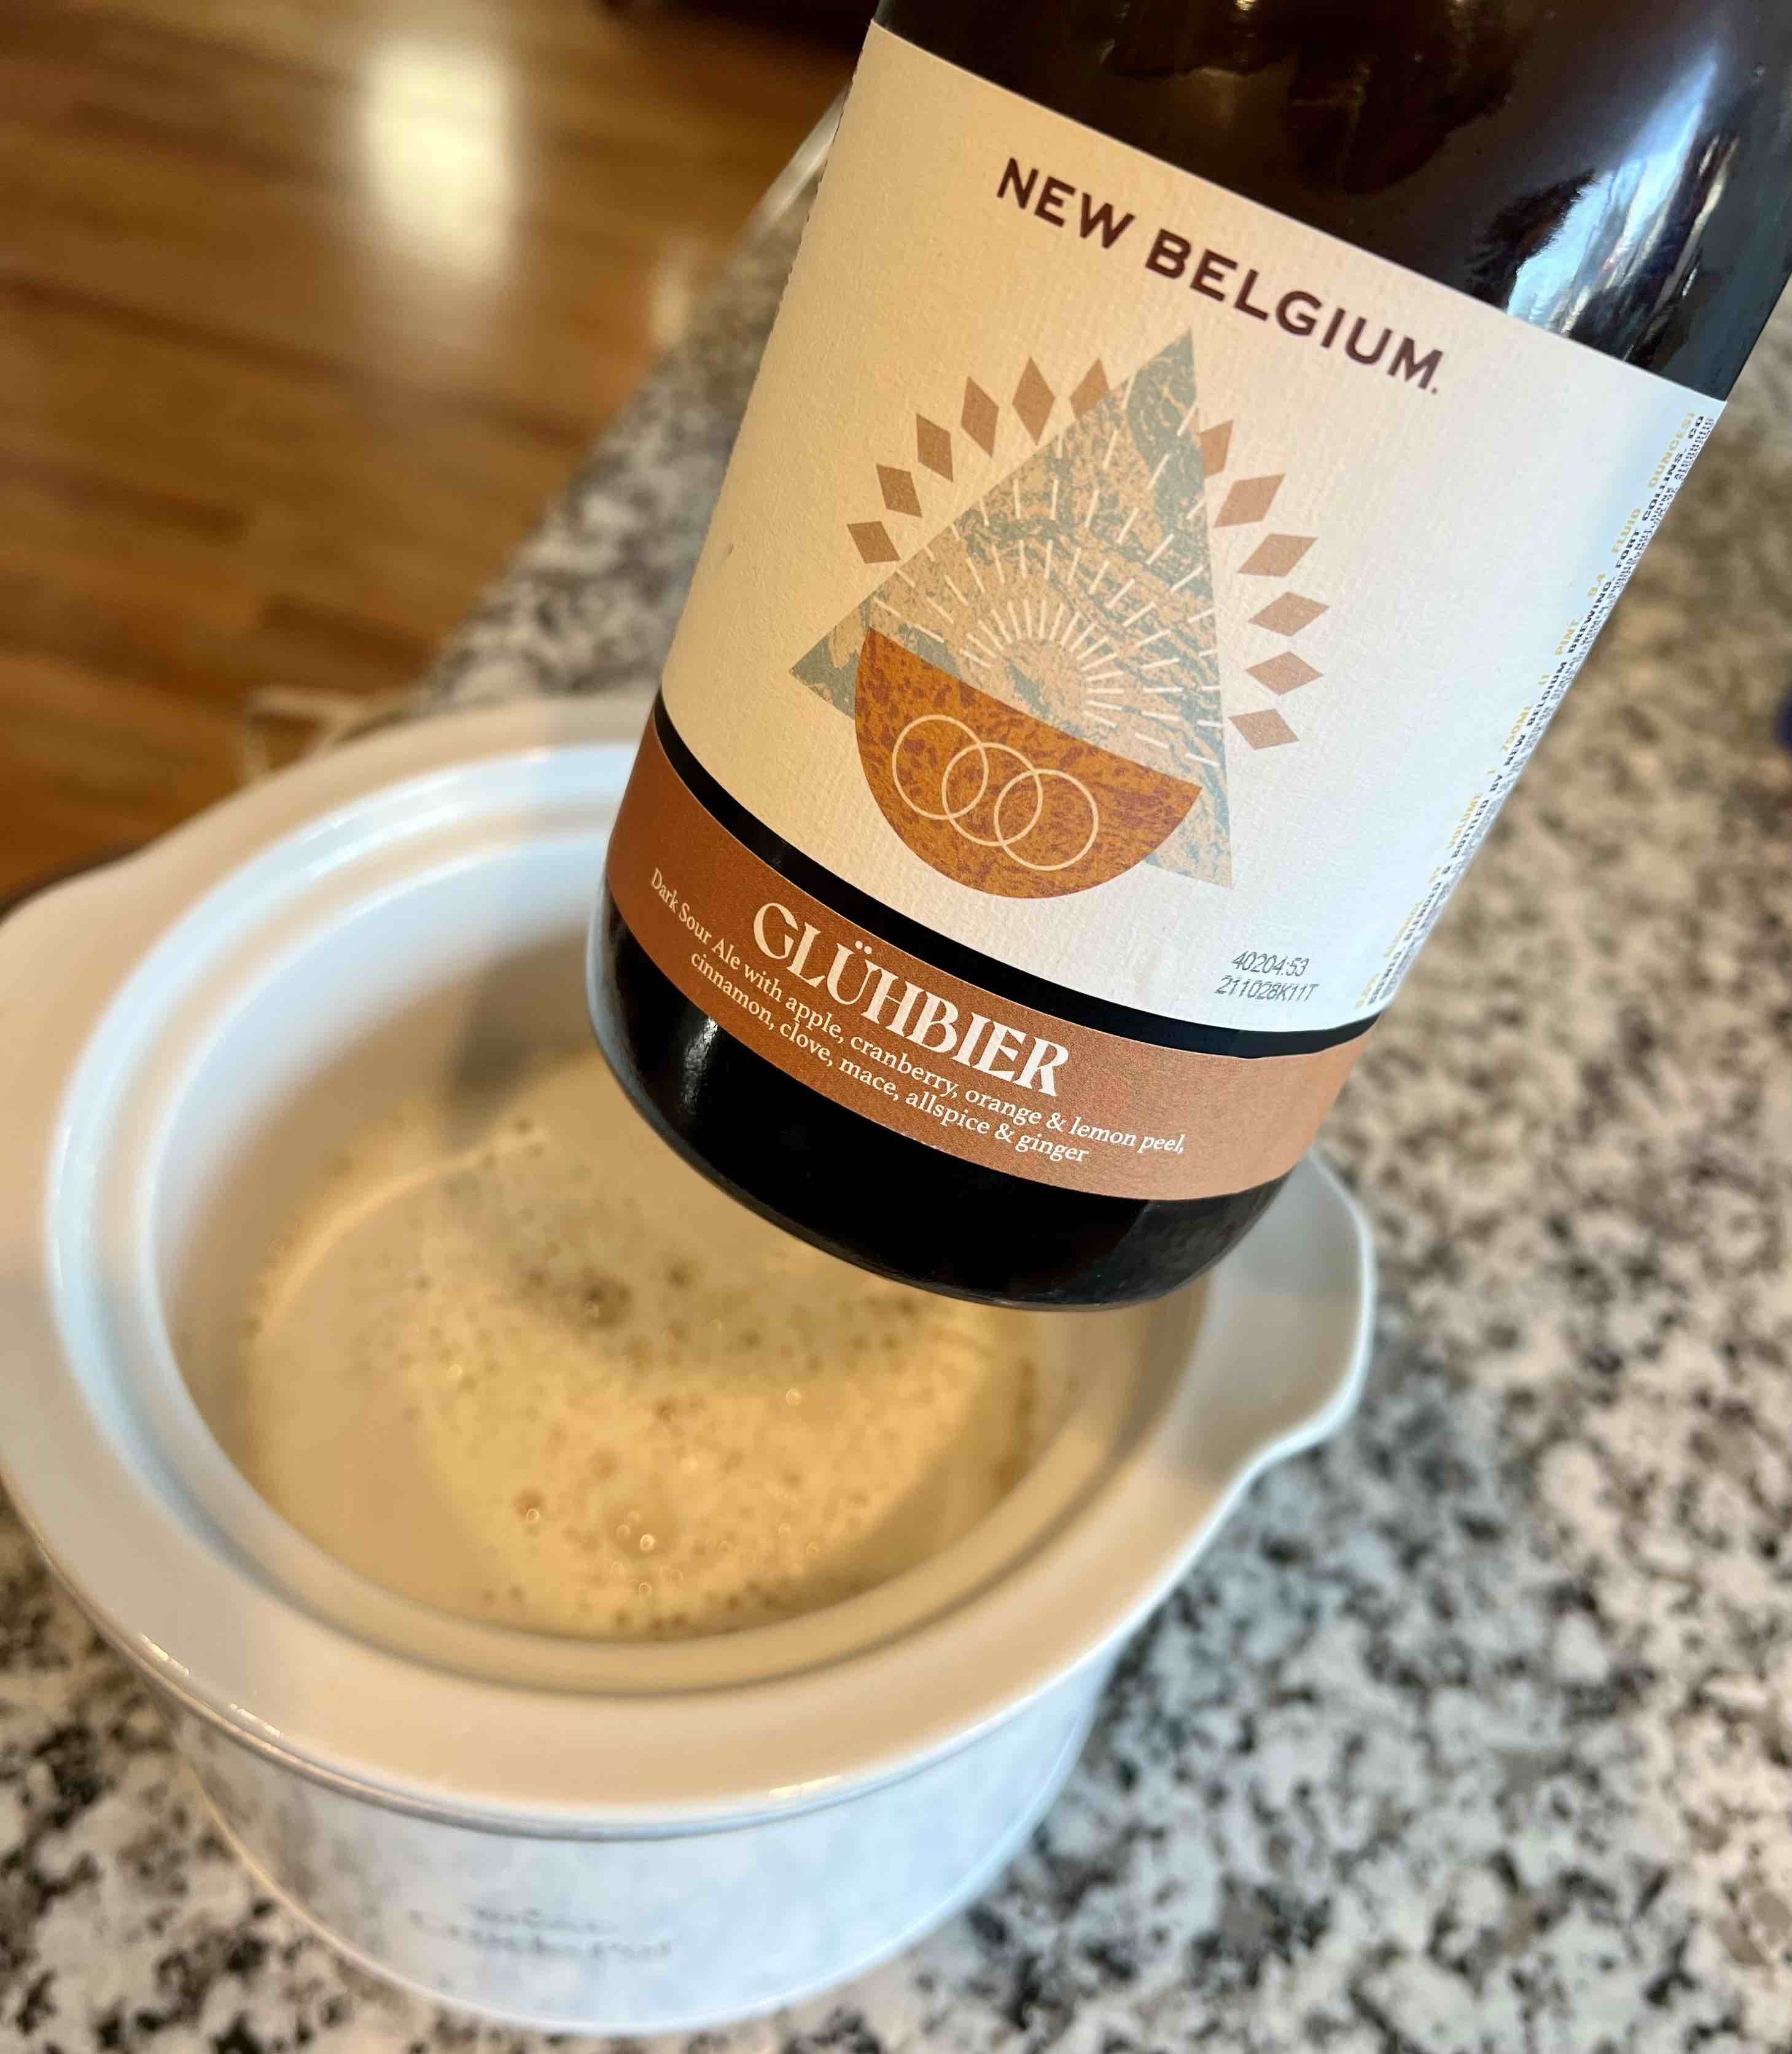 Adding the New Belgium Brewing Glühbier to the crockpot for a bit of warming.